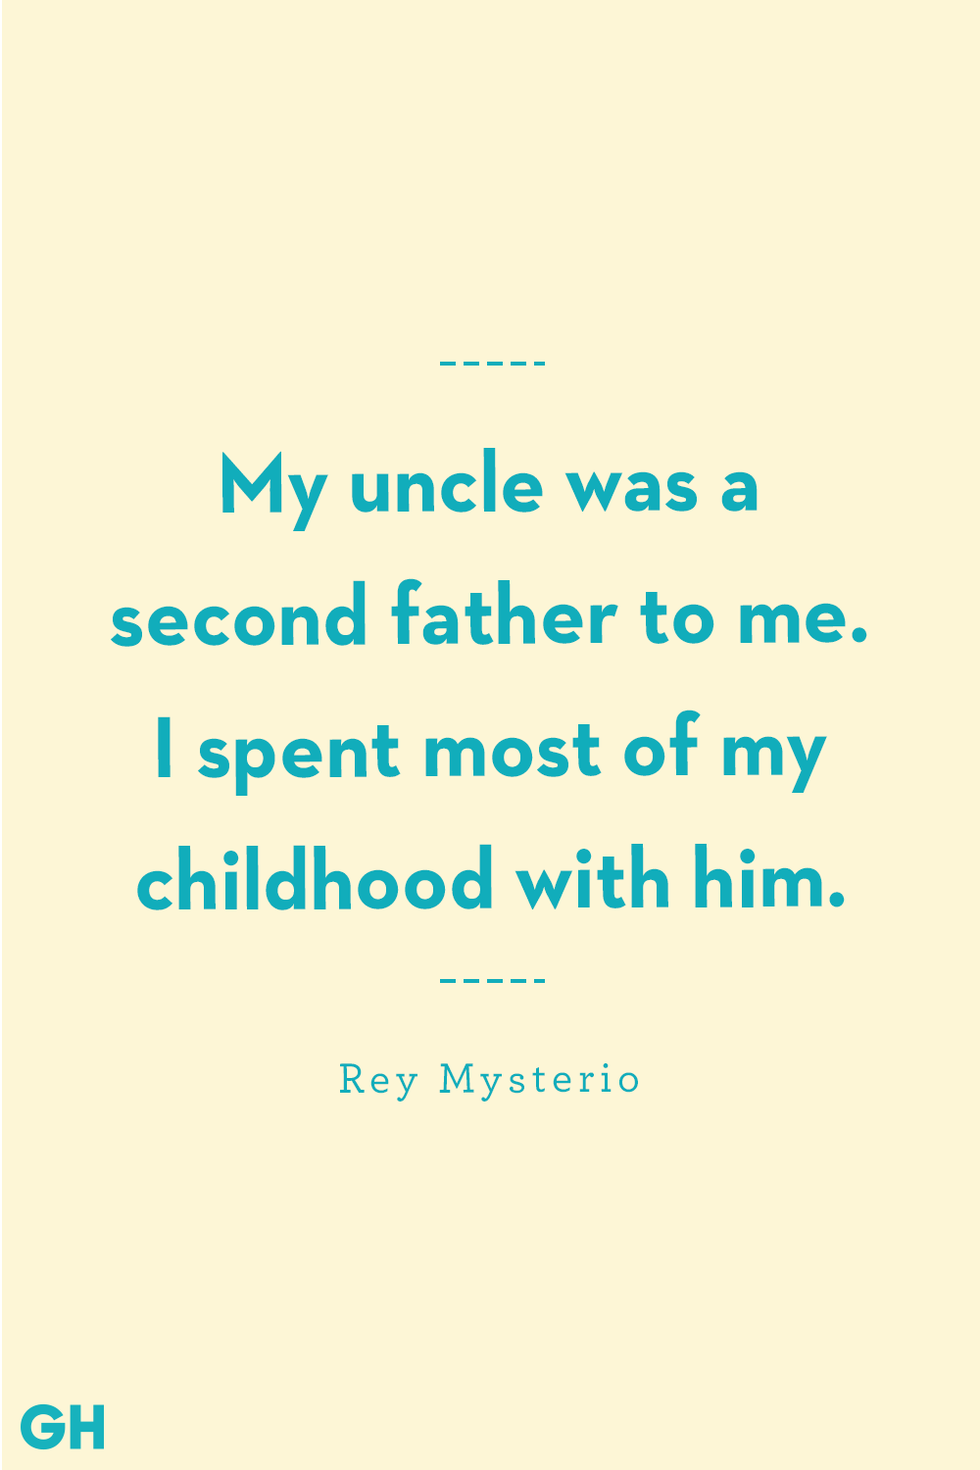 https://hips.hearstapps.com/hmg-prod/images/uncle-quotes-rey-mysterio-1557775235.png?crop=1xw:1xh;center,top&resize=980:*